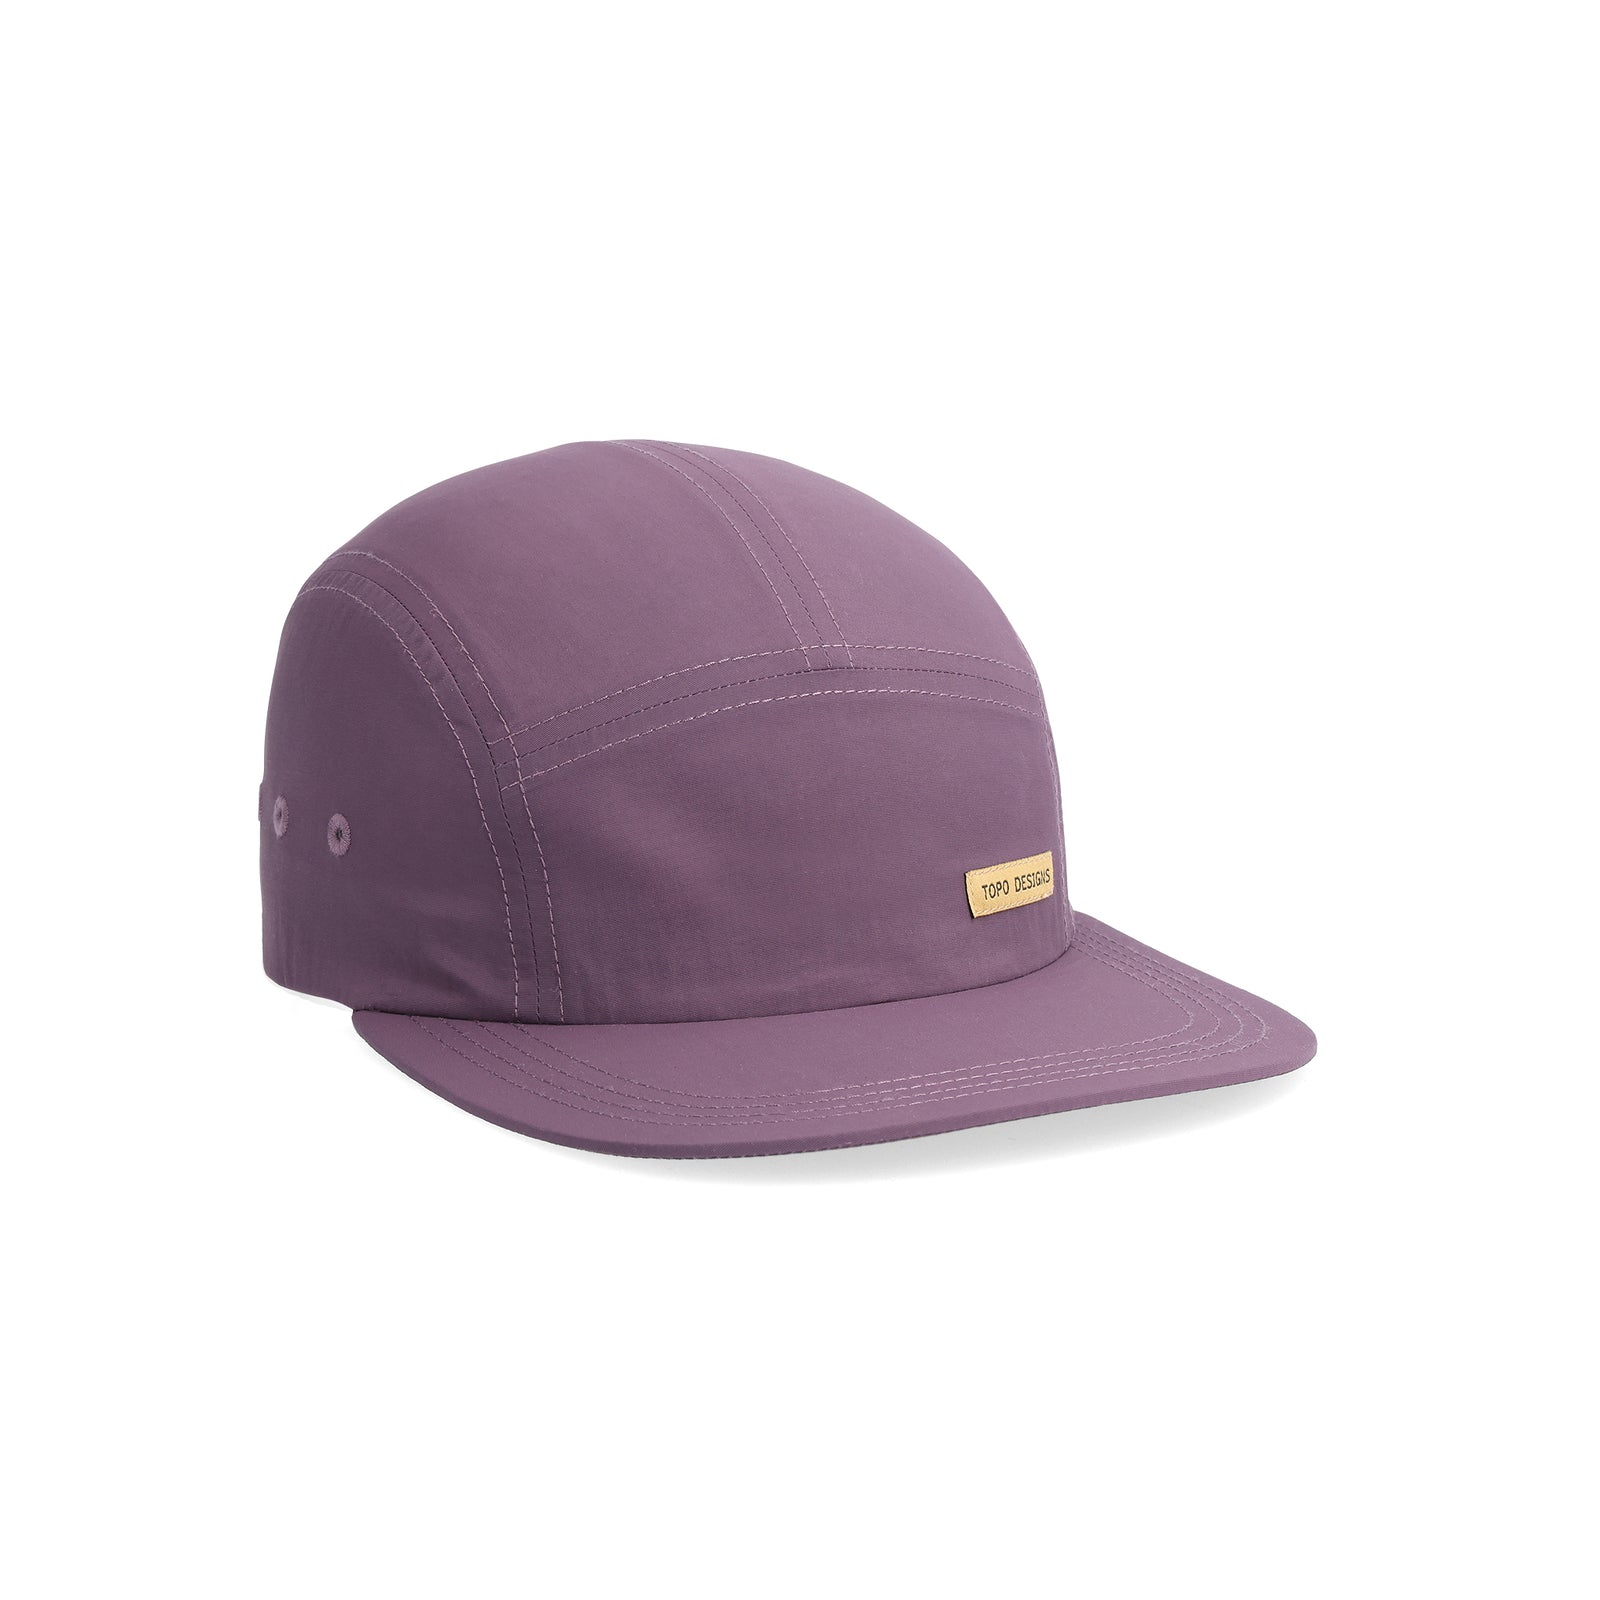 Front View of Topo Designs Nylon Camp Hat in "Loganberry"